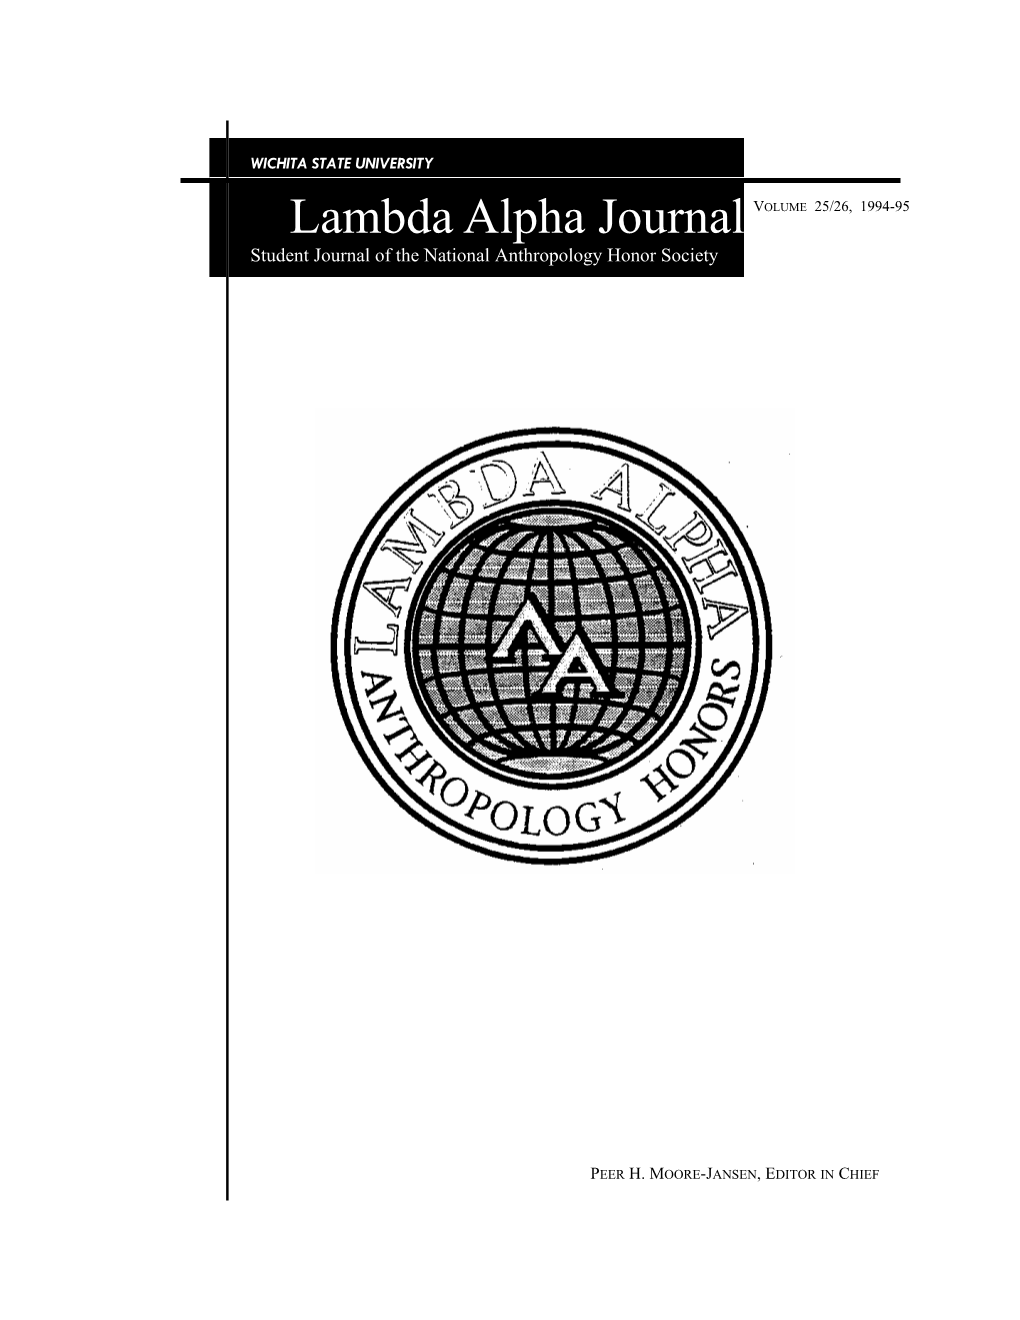 Lambda Alpha Journal Student Journal of the National Anthropology Honor Society